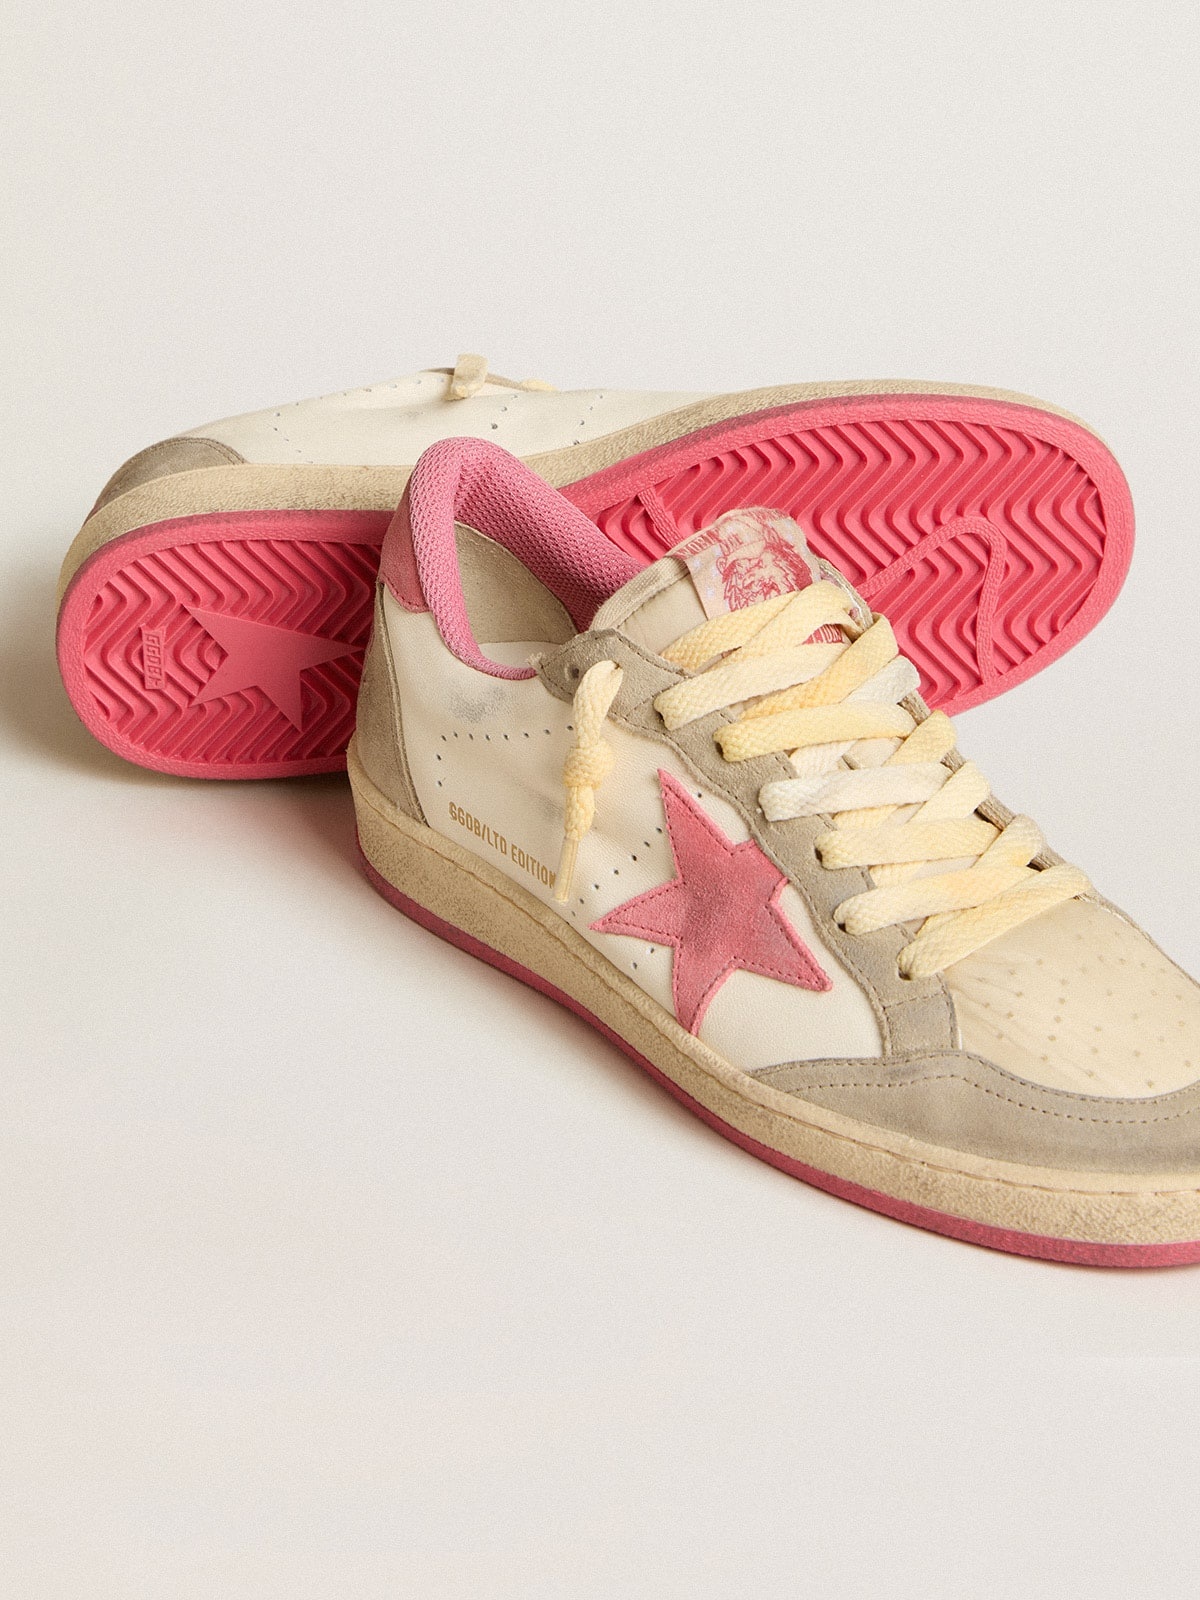 Ball Star LTD in nappa with pink suede star and dove-gray inserts - 3